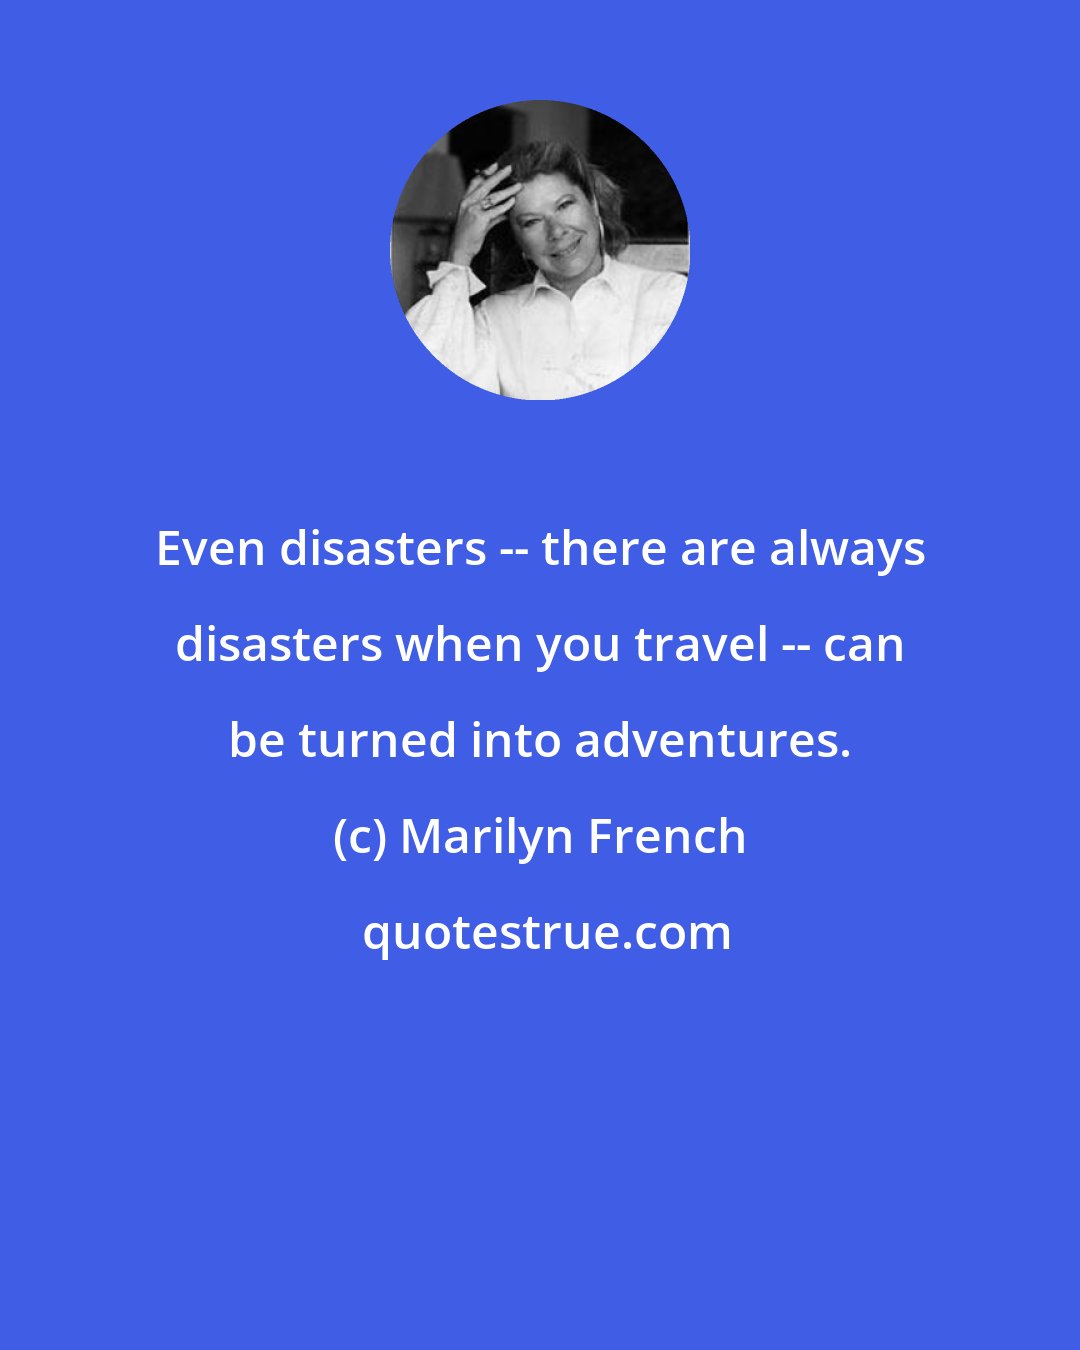 Marilyn French: Even disasters -- there are always disasters when you travel -- can be turned into adventures.